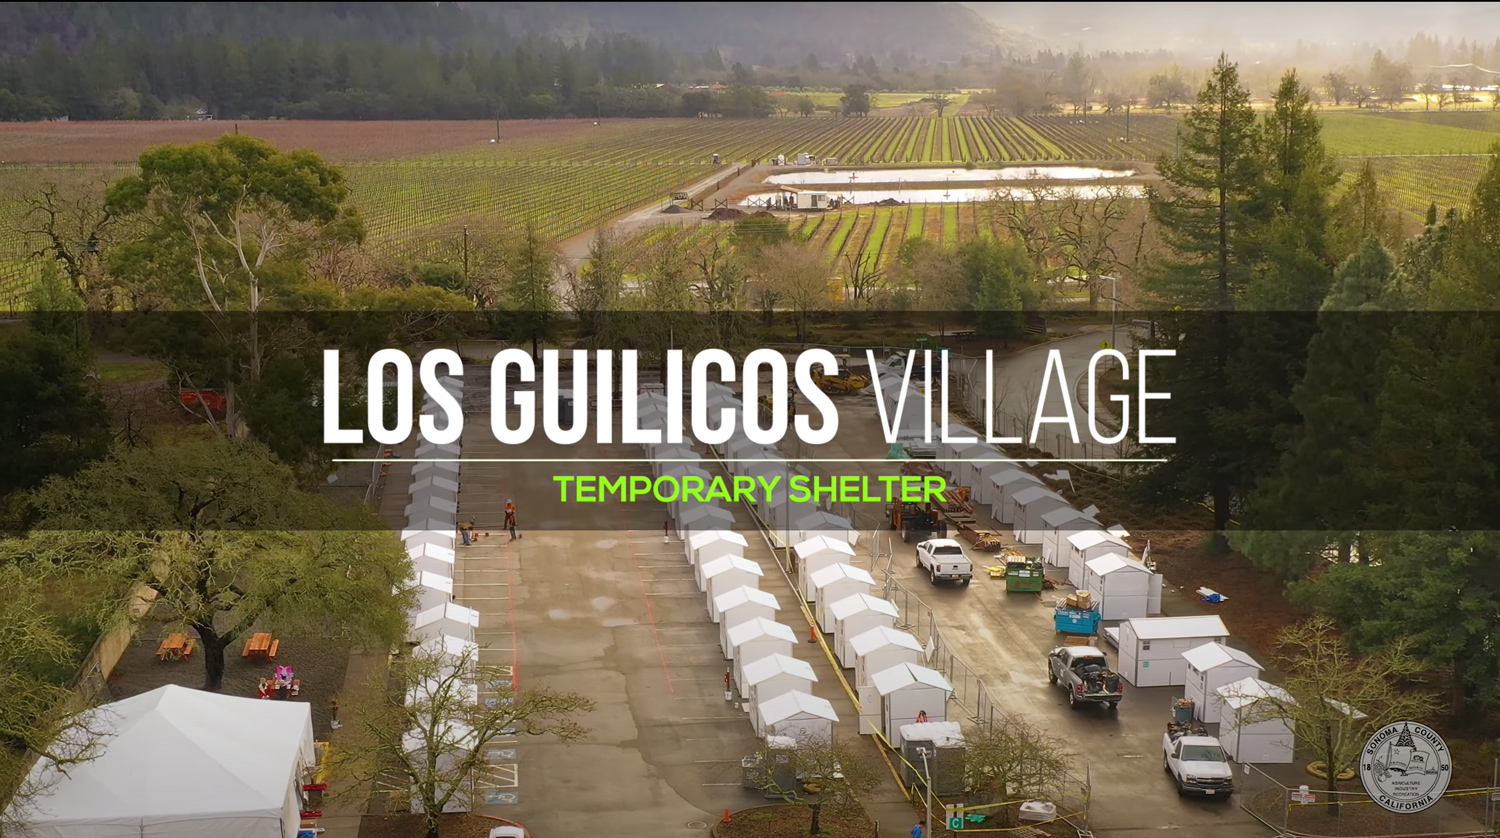 It takes a Village – Transitioning out of Homelessness at Los Guilicos Village